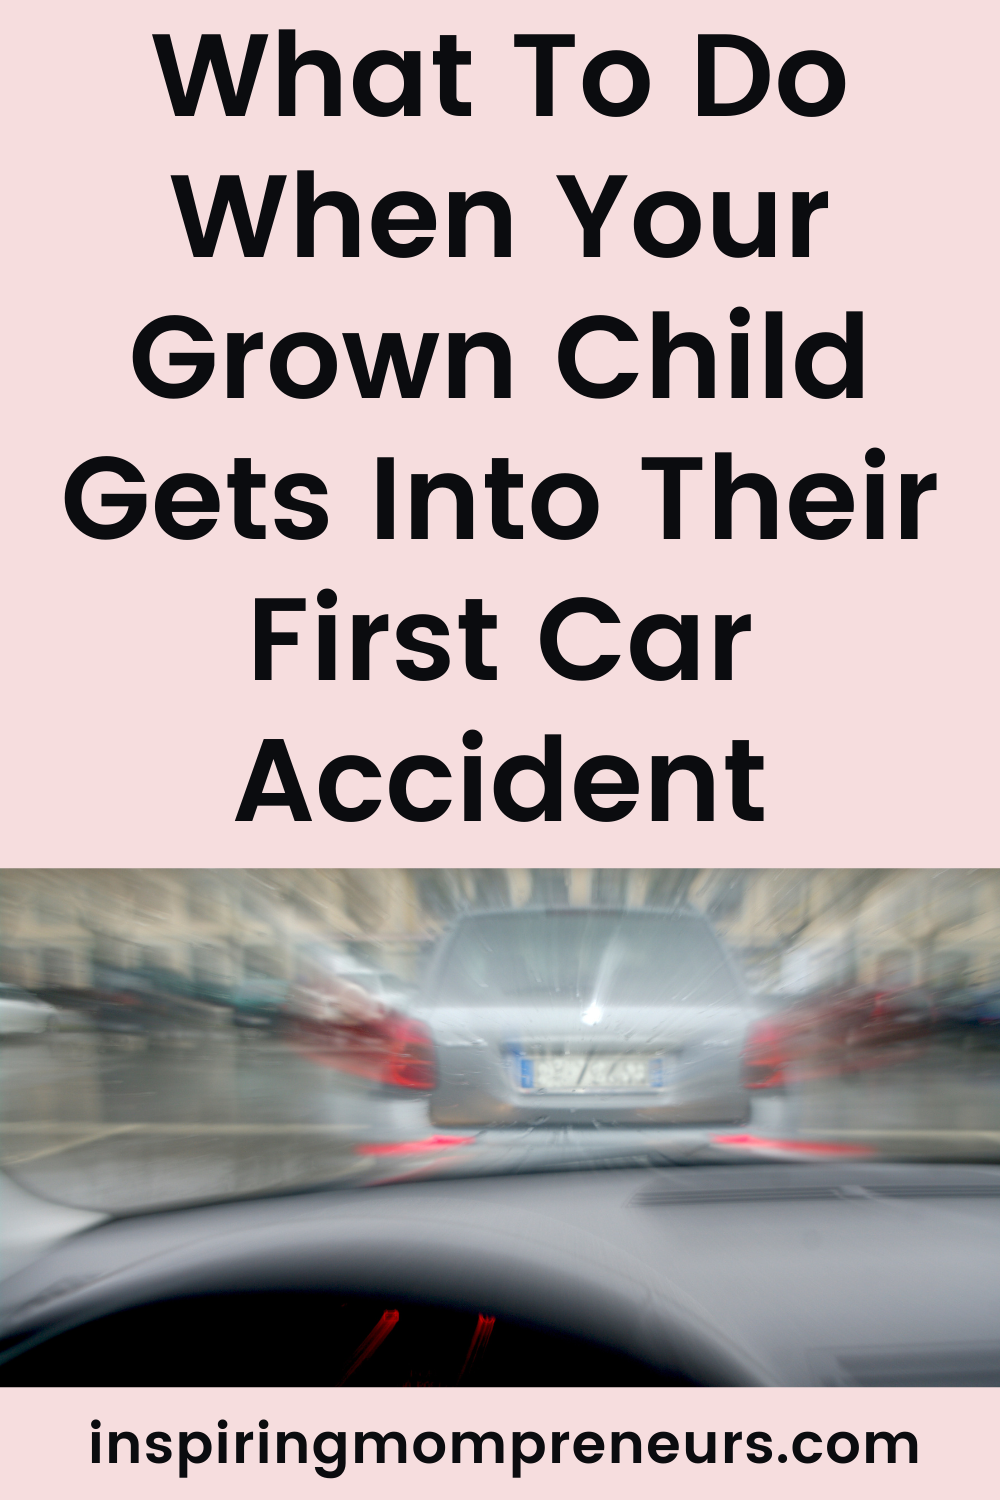 A car accident is not easy to deal with and it's worse when your child is involved. Here's what to do when your grown child gets into their first car accident.